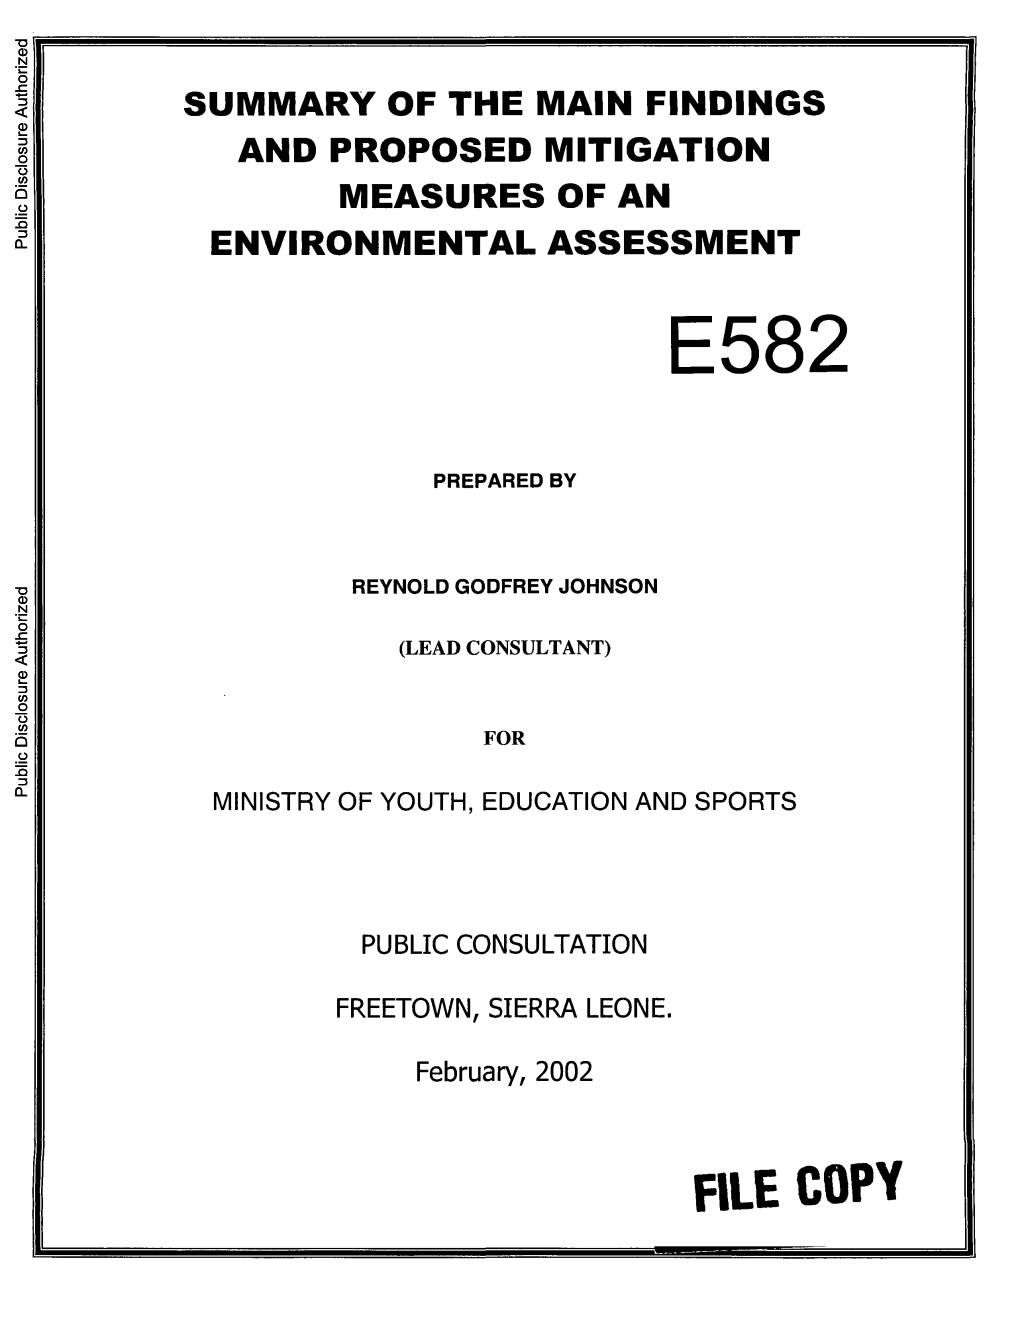 Summary of the Main Findings and Proposed Mitigation Measures of An